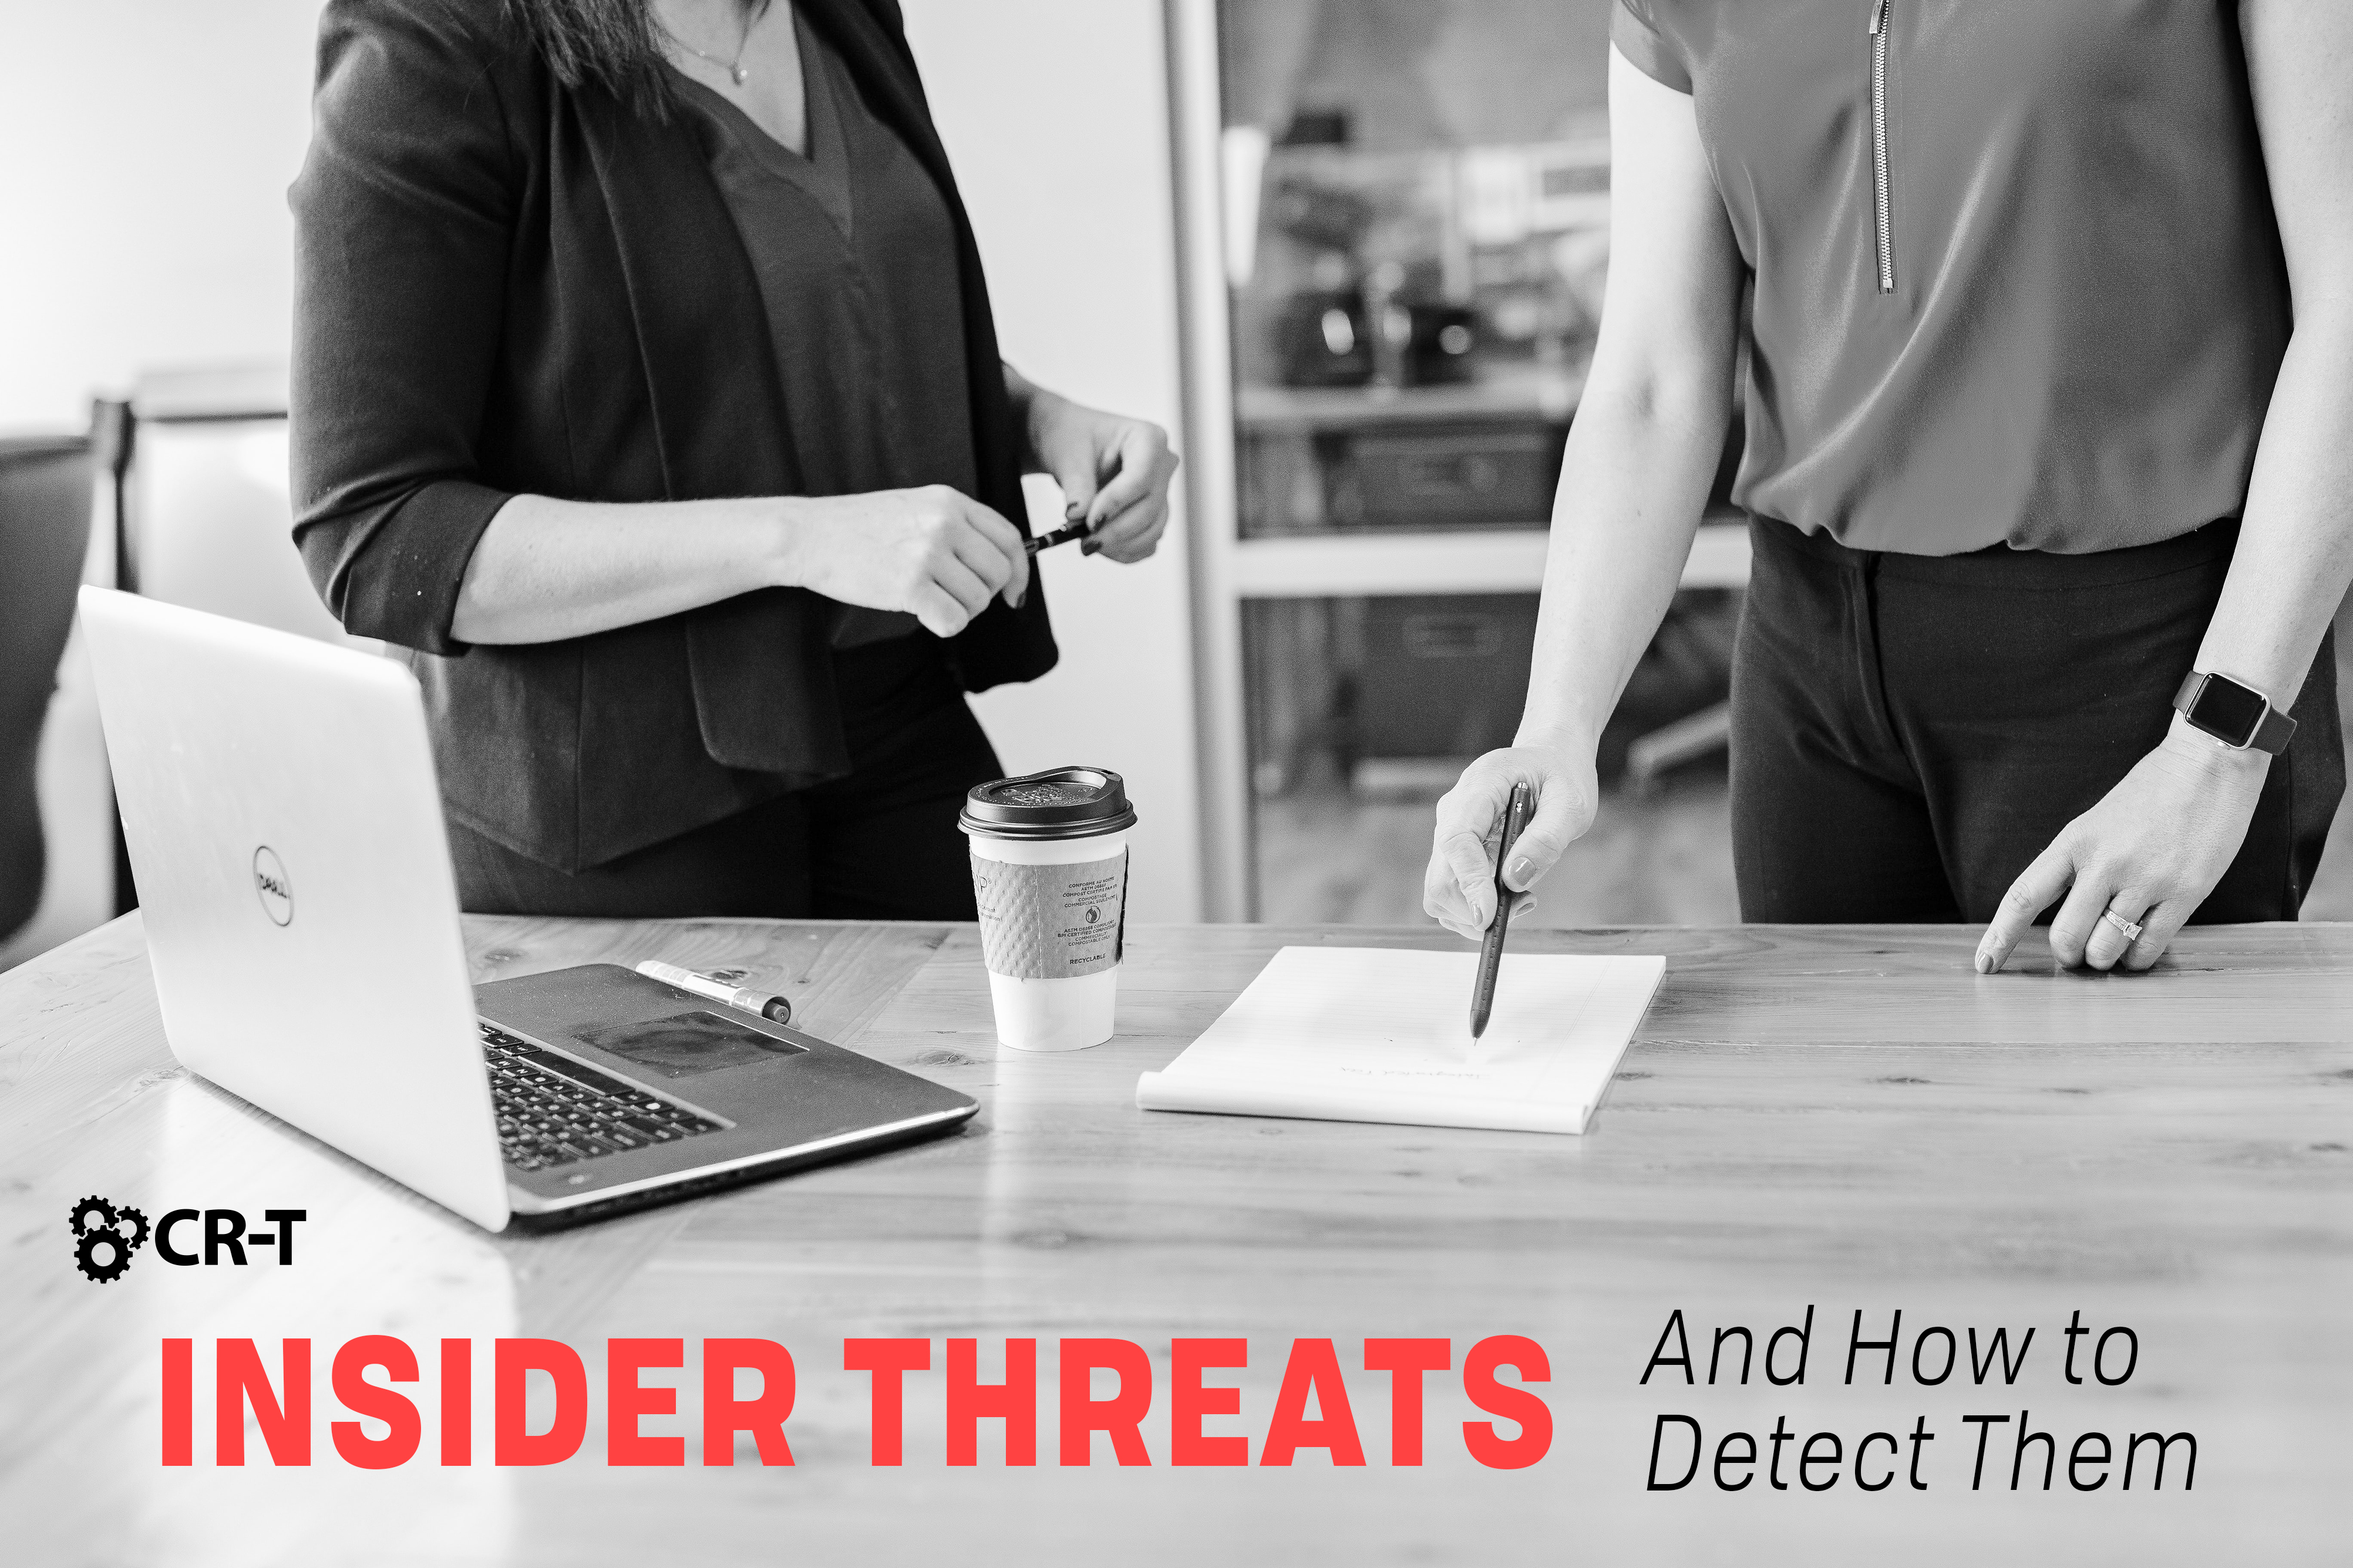 You are currently viewing Insider Threats and How to Detect Them